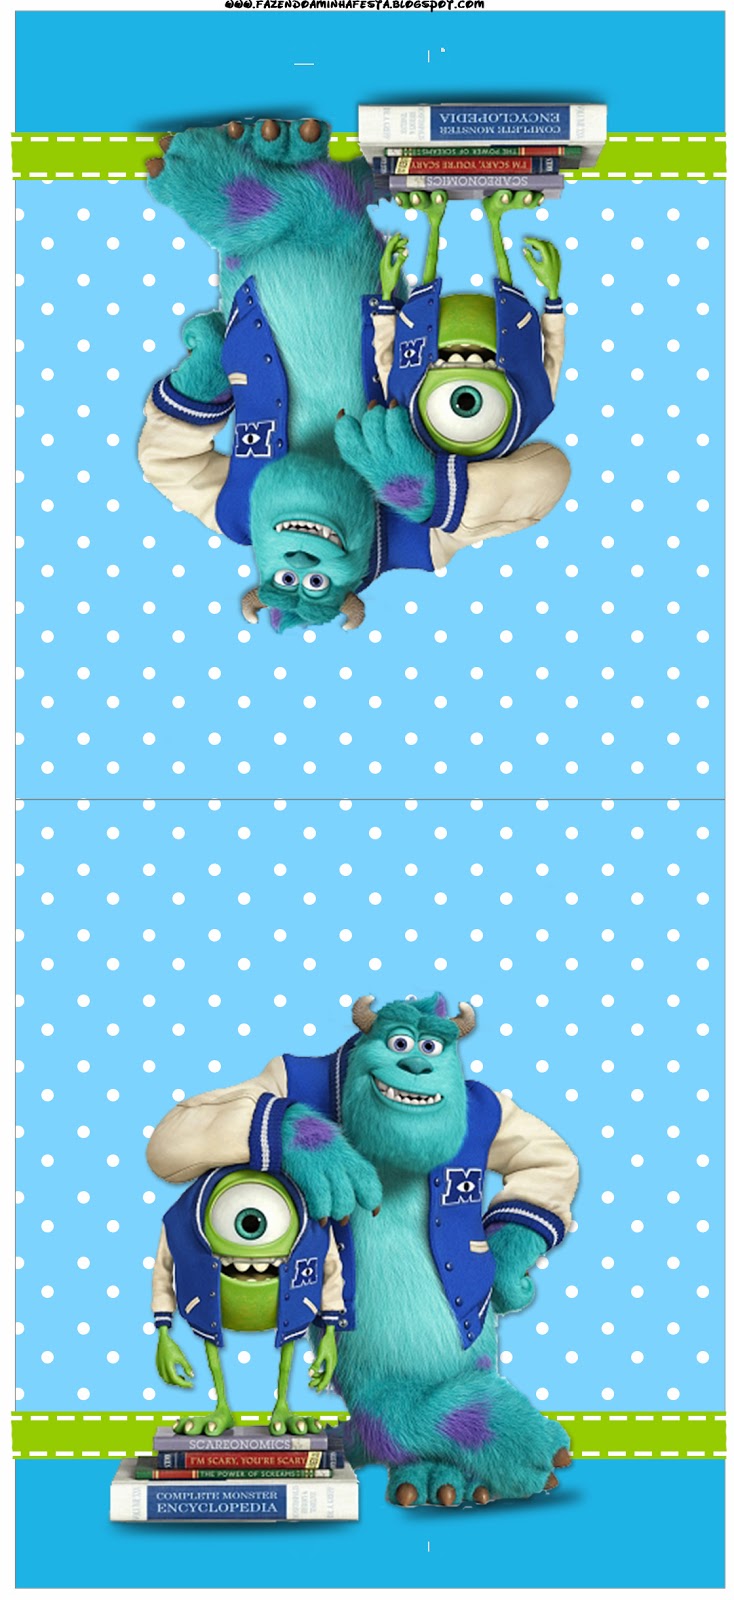 monster-university-free-printable-party-invitations-oh-my-fiesta